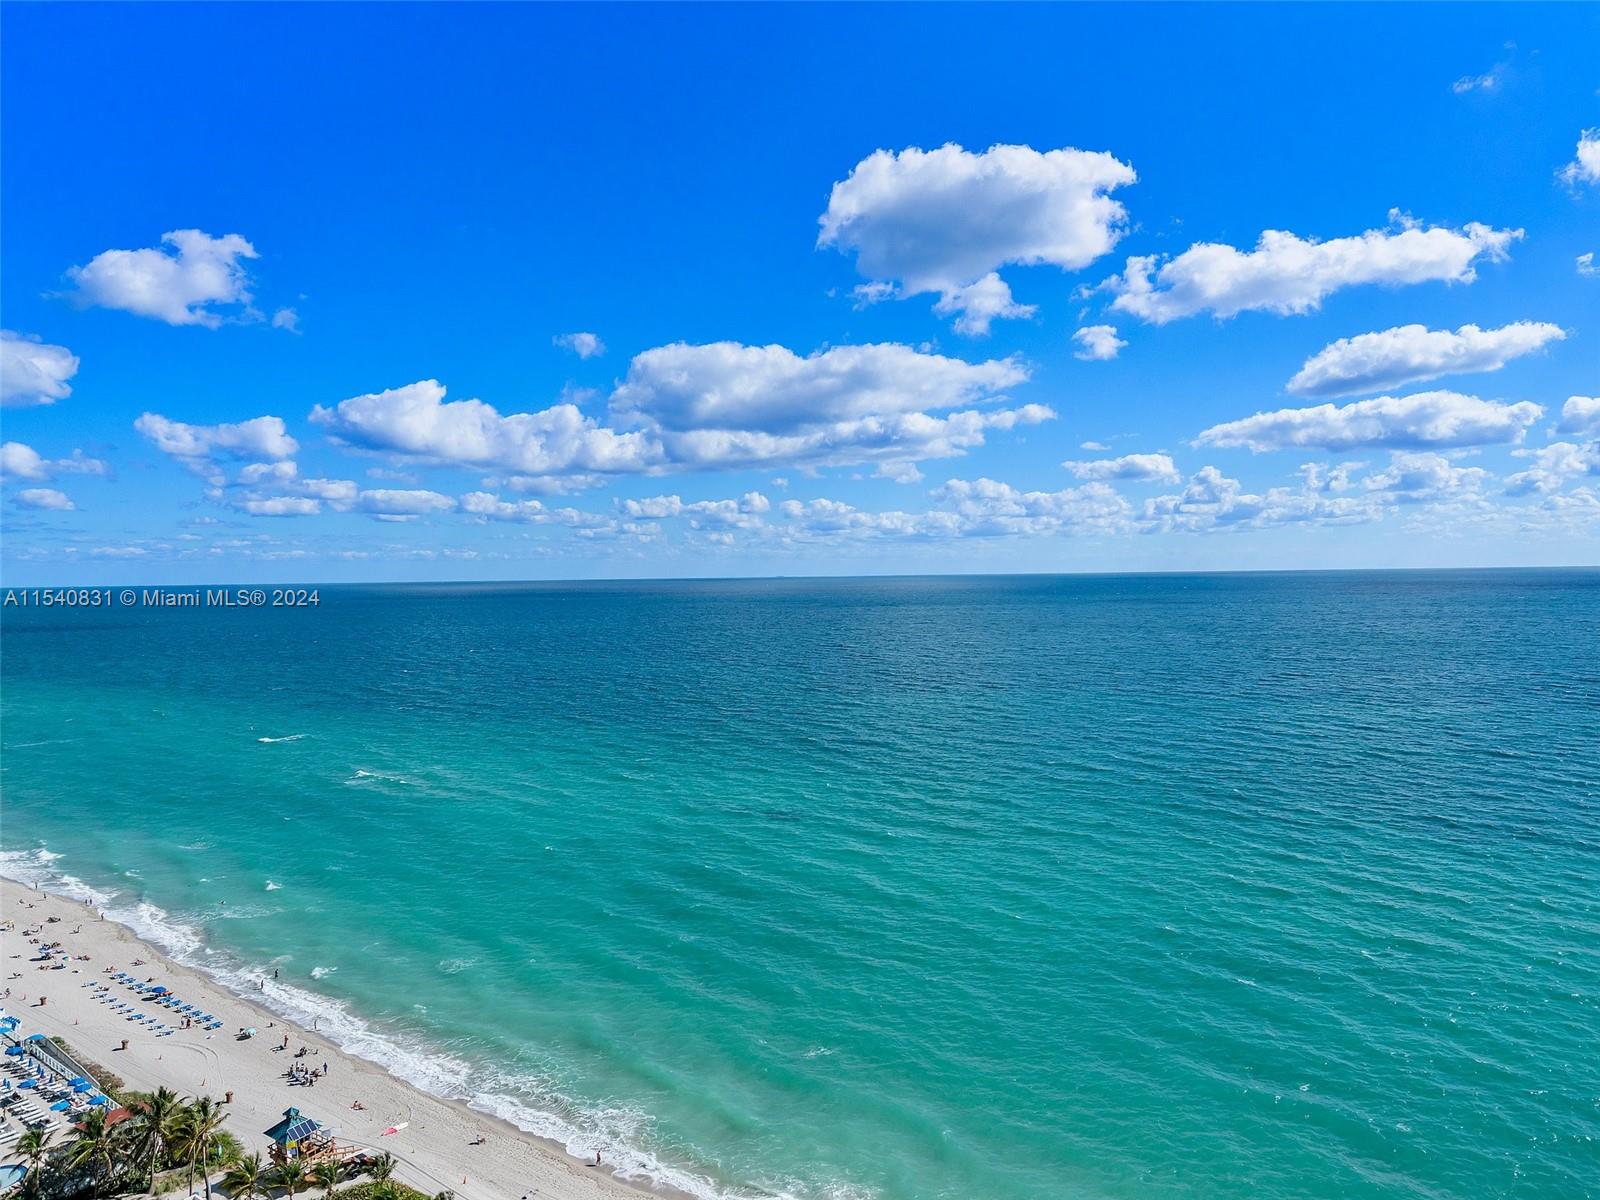 Exquisite Direct Ocean & Breathtaking Panoramic Bay Views in This 2-bedrooms/2.5-bathrooms Residence in One of the Most Desirable Condos - The Ocean II in upscale Sunny Isles Beach! From your private foyer you'll be drawn to the blues of the ocean on your right, where you can unwind & soak in the salty breeze on a private balcony. As if that’s not enough, you’ll then be mesmerized by the silvery mirror-like Bay on your left, aka your tropically vibrant sunset side. Seamless flow through layout, perfect for entertaining guests, relaxing serenity, 2 balconies, split bedrooms ensuring maximum privacy & comfort, gleaming marble floors, laundry-utility room. Truly magnificent living experience with state-of-the-art amenities. Perfect sanctuary to indulge & recharge. Make this one your reality.